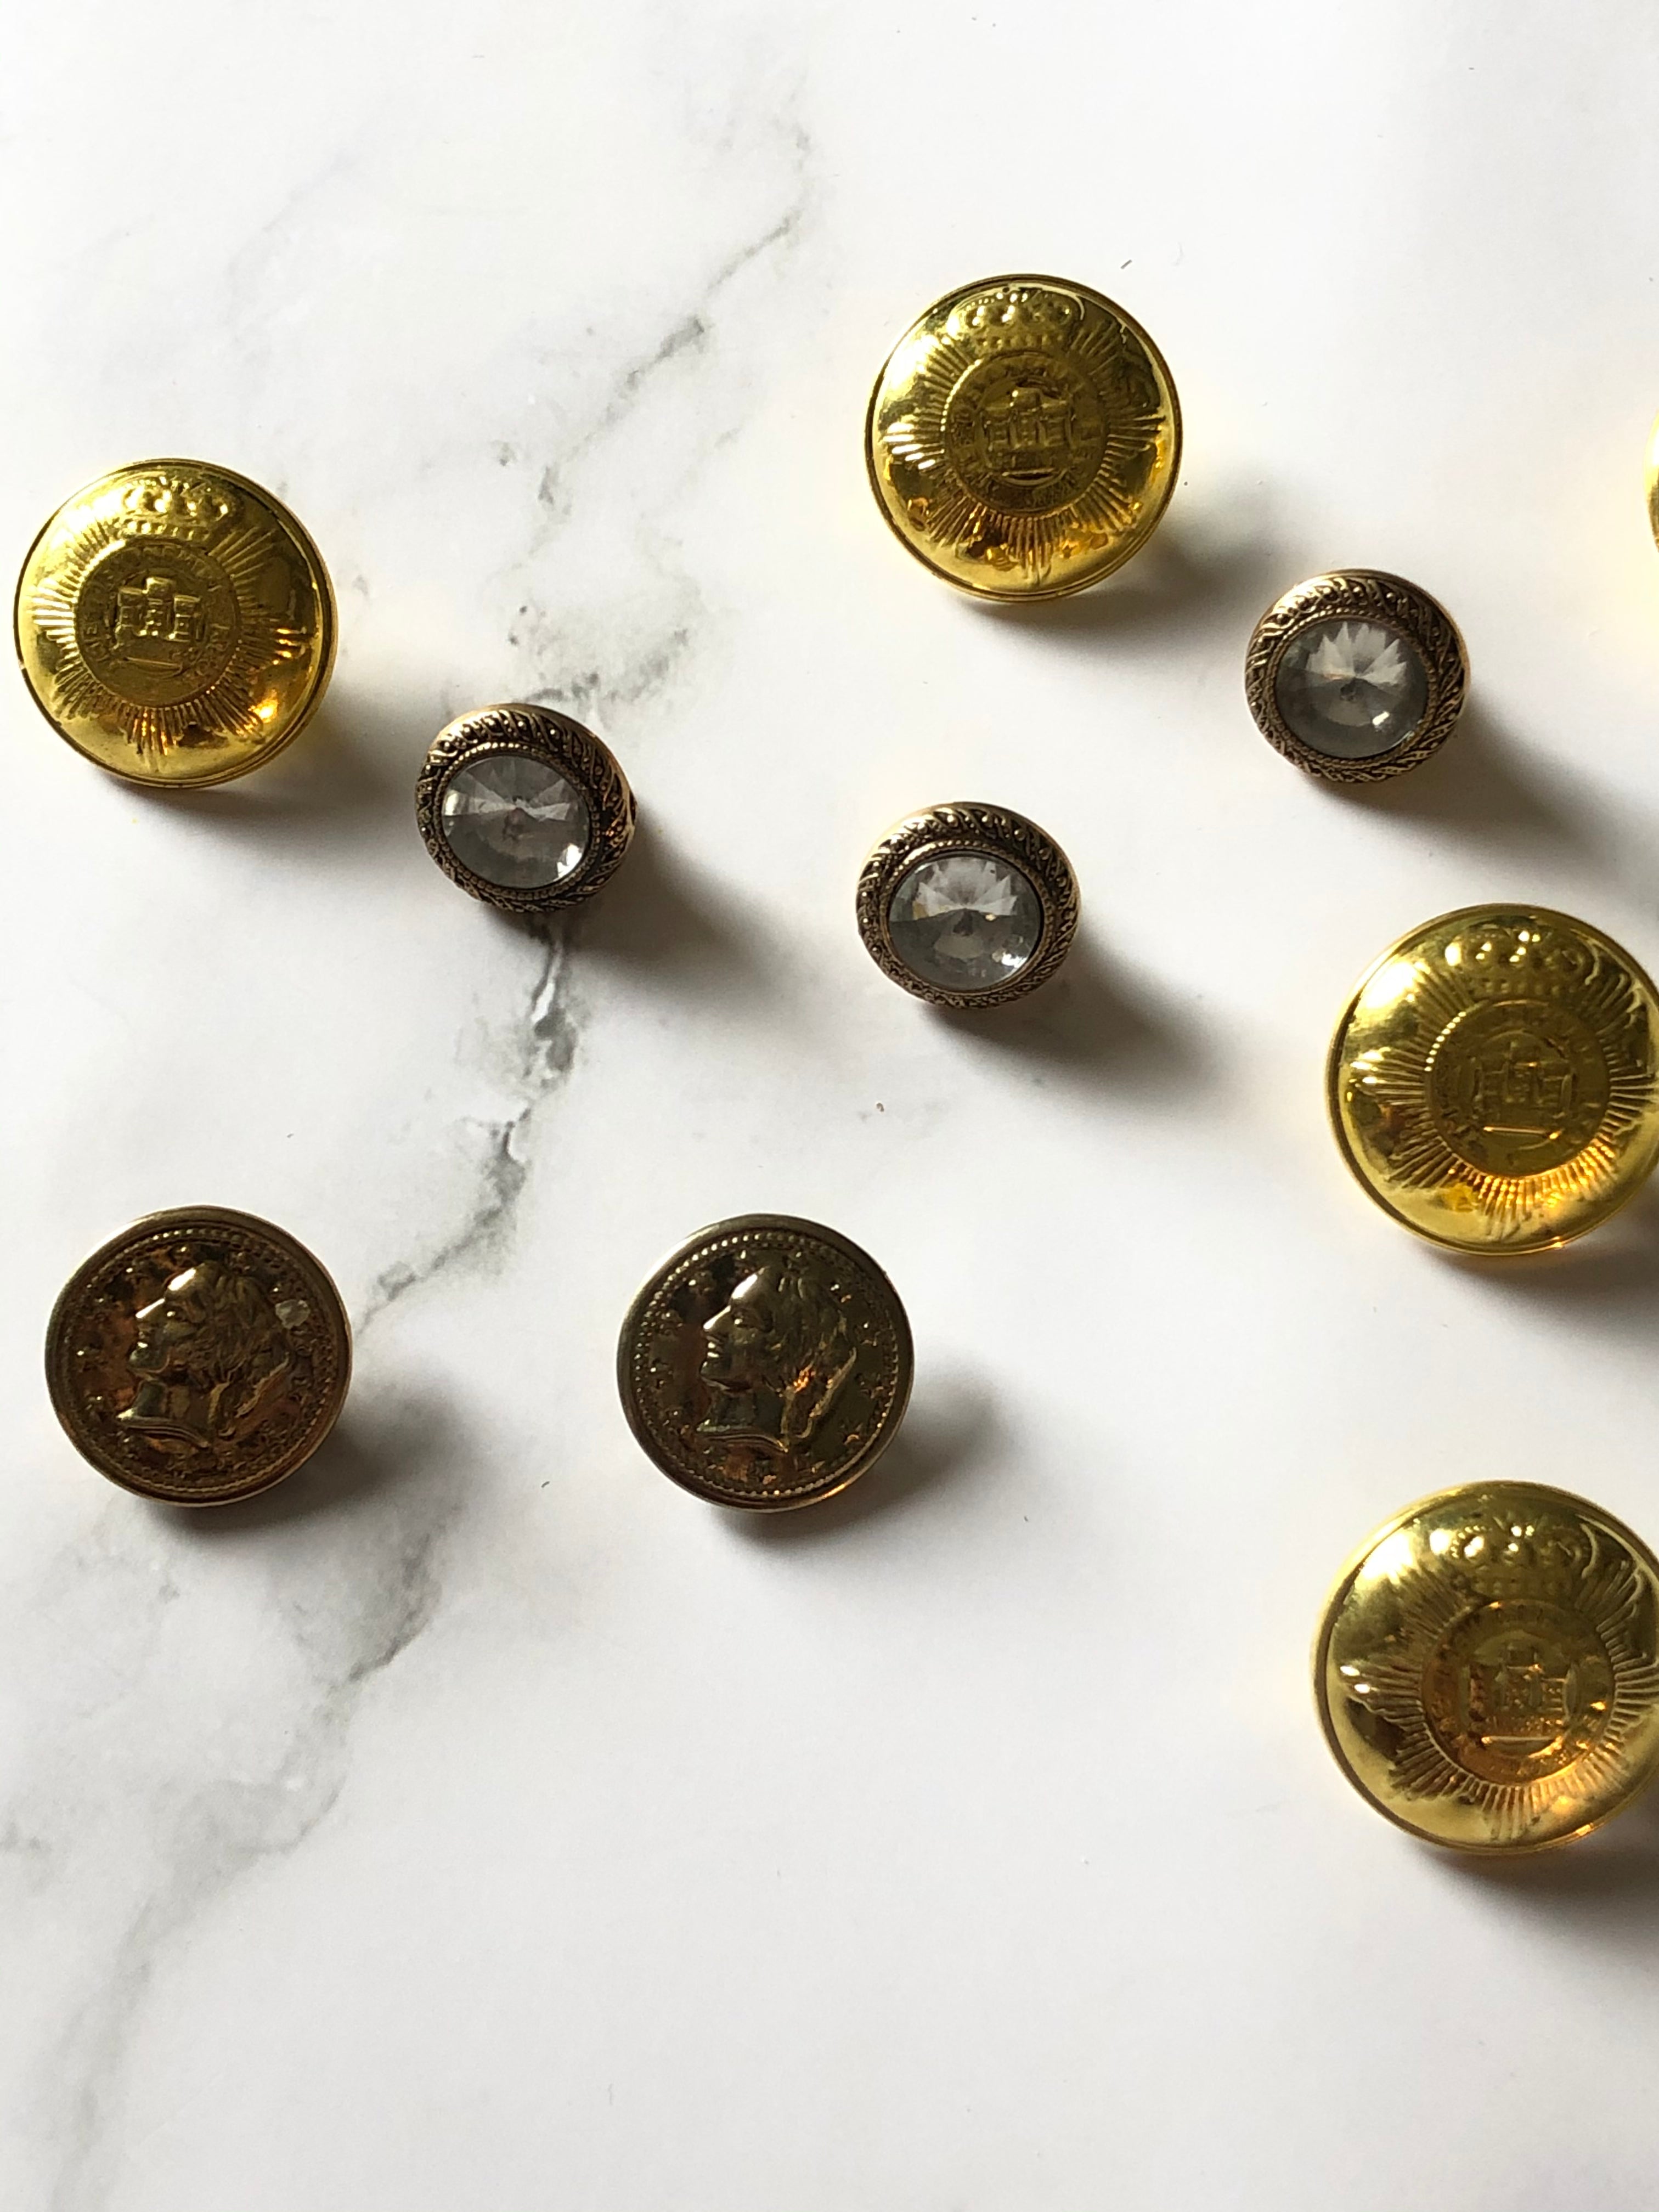 Three Kinds Vintage Metal Button Pack of 10 pcs